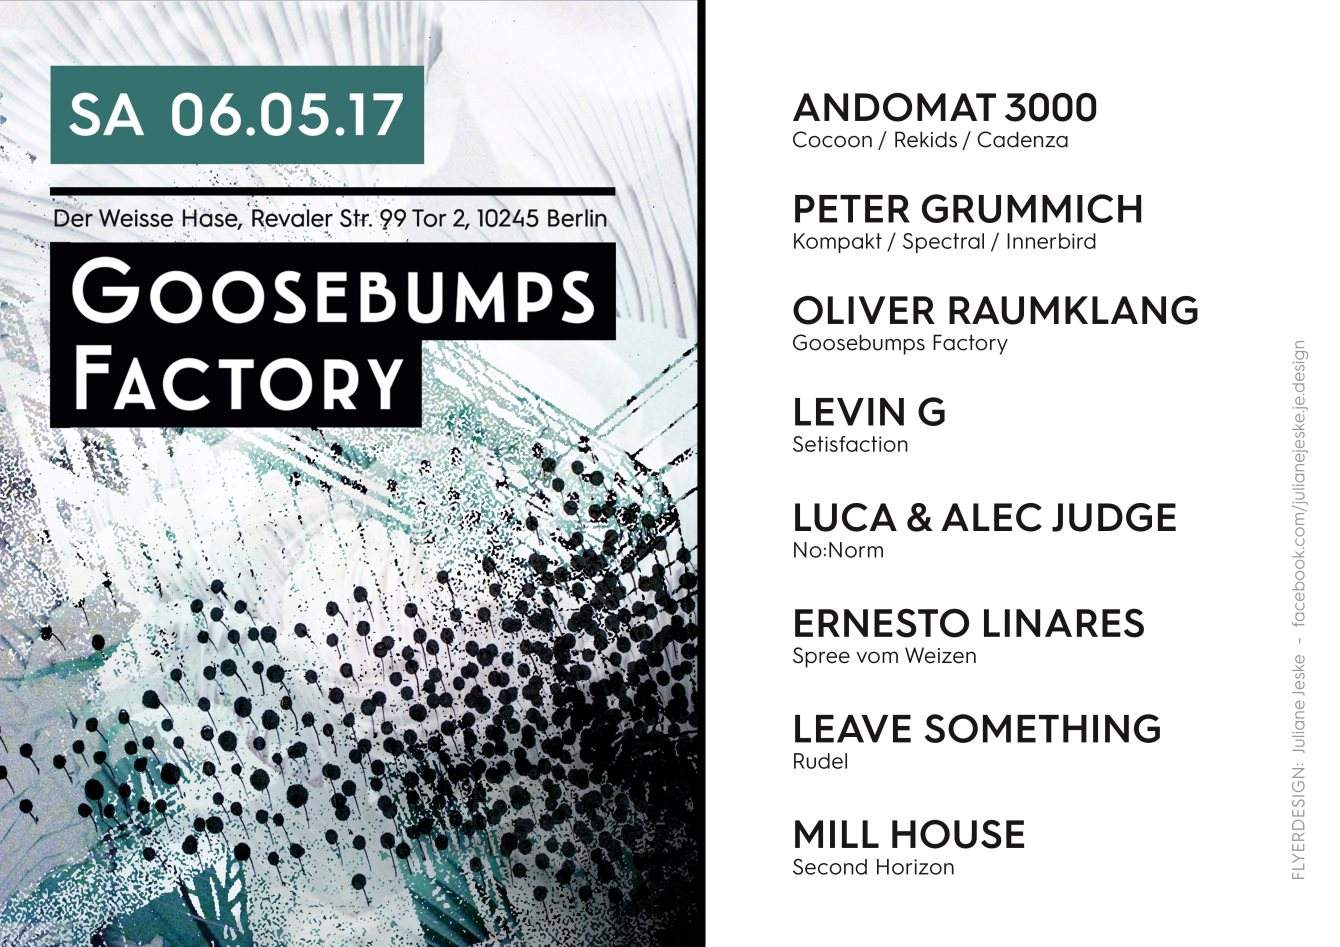 Goosebumps Factory with Andomat 3000, Peter Grummich, Oliver Raumklang, Levin G and More - フライヤー裏